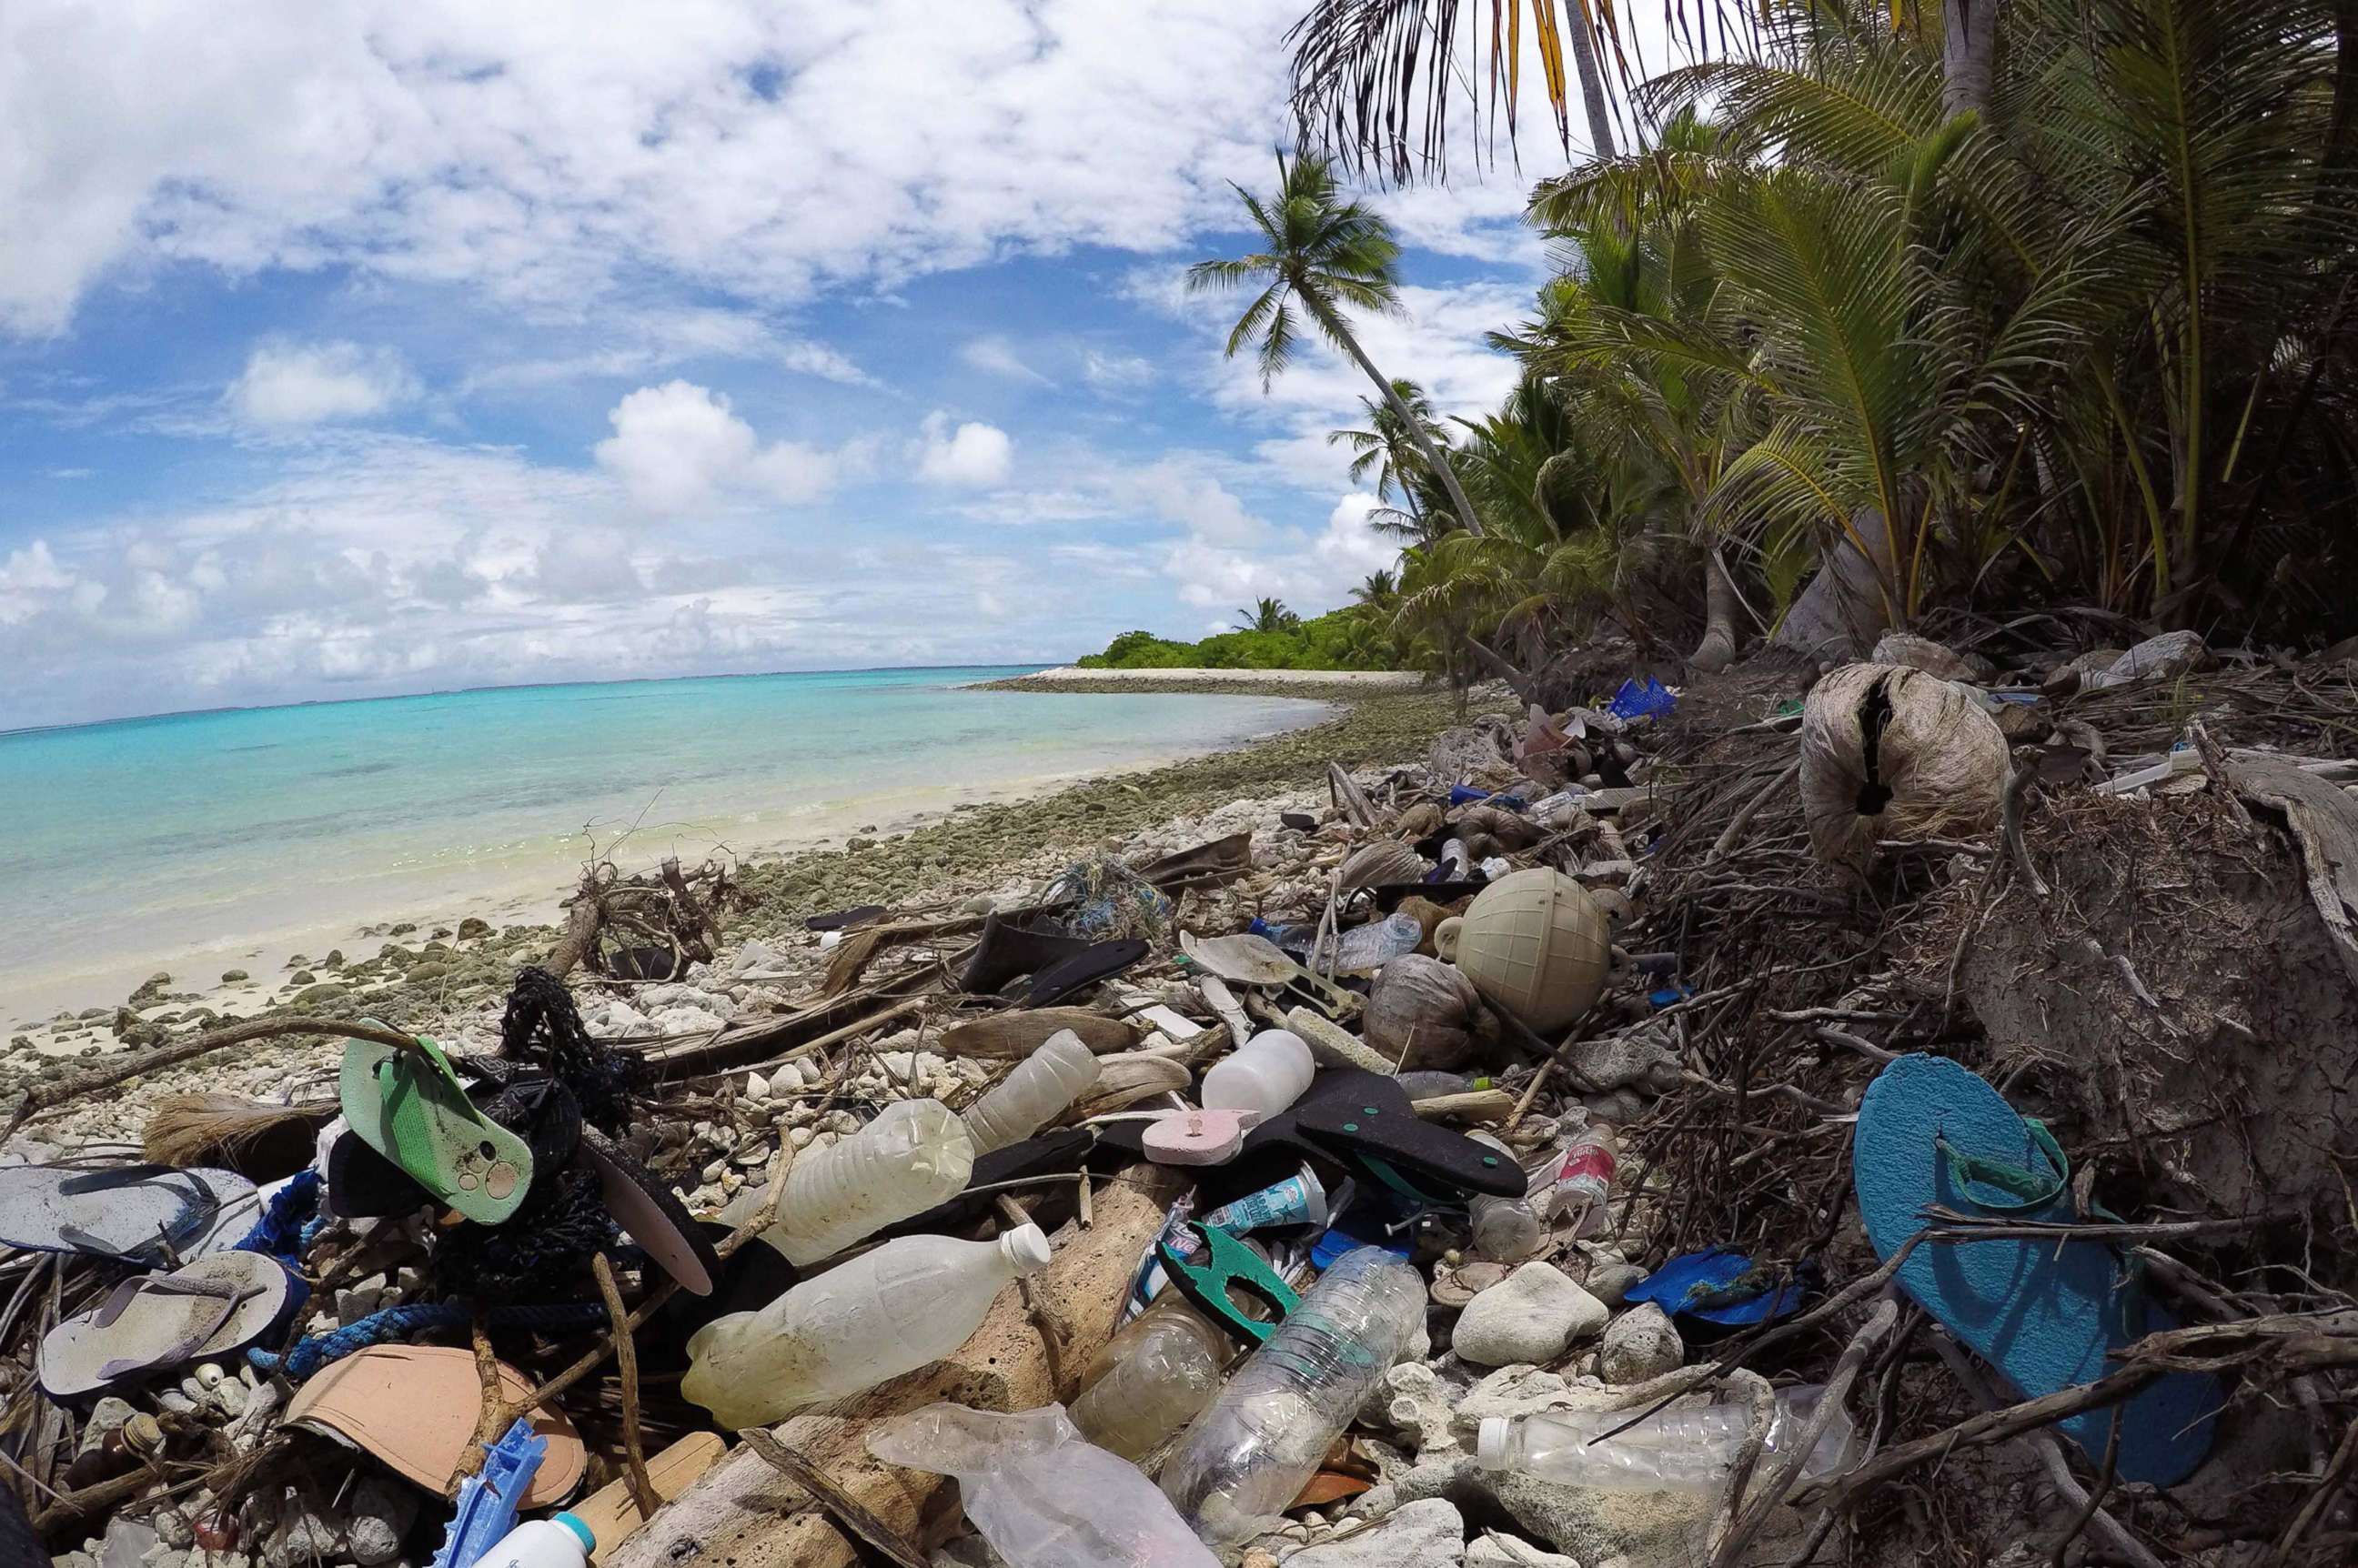 PHOTO: Plastic debris washed up on a beach on Cocos Islands, Australia.